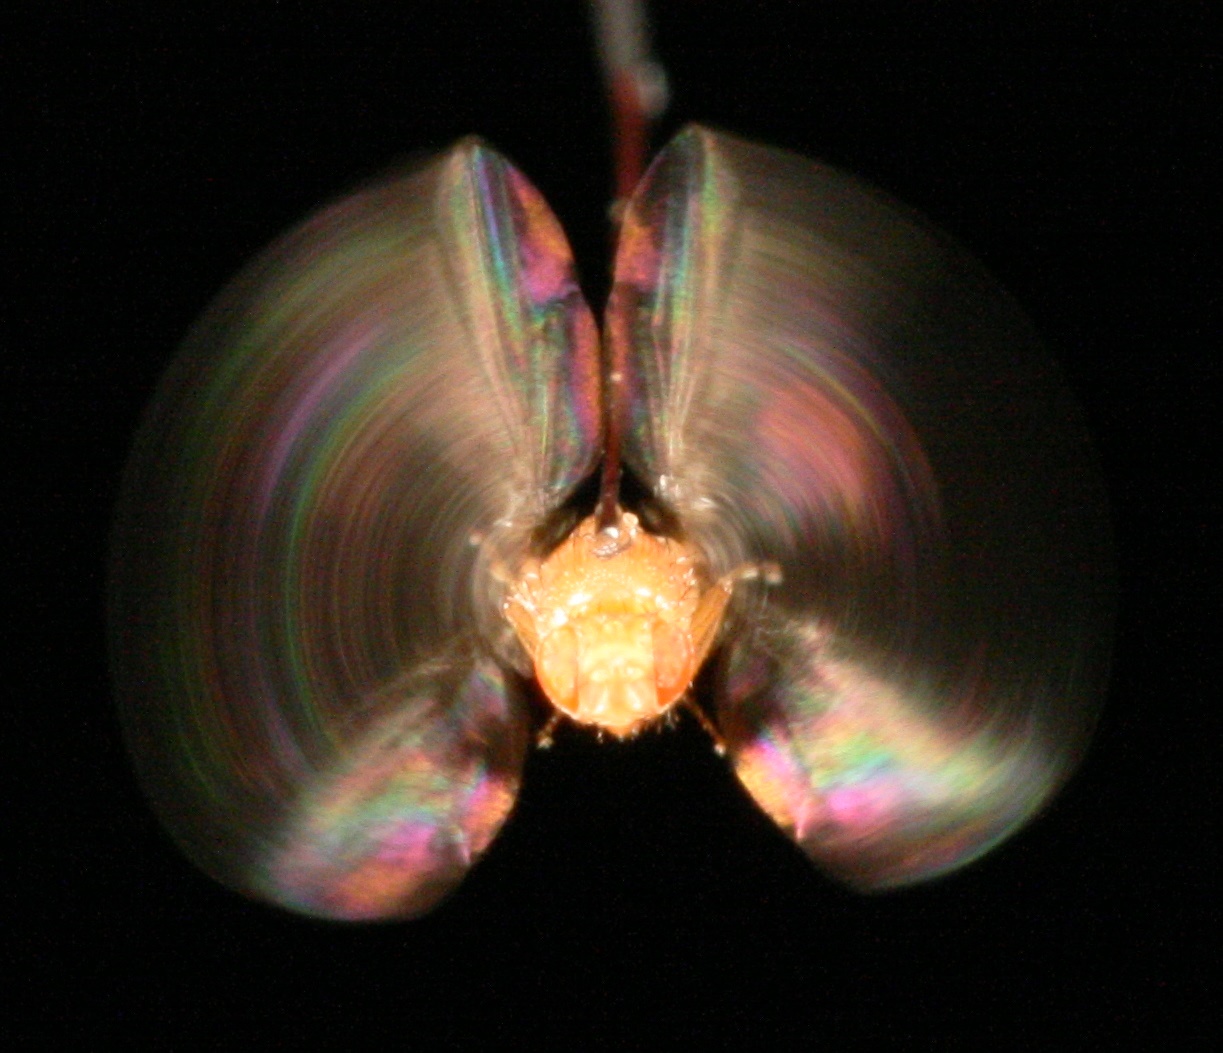 A fruit fly in tethered flight.